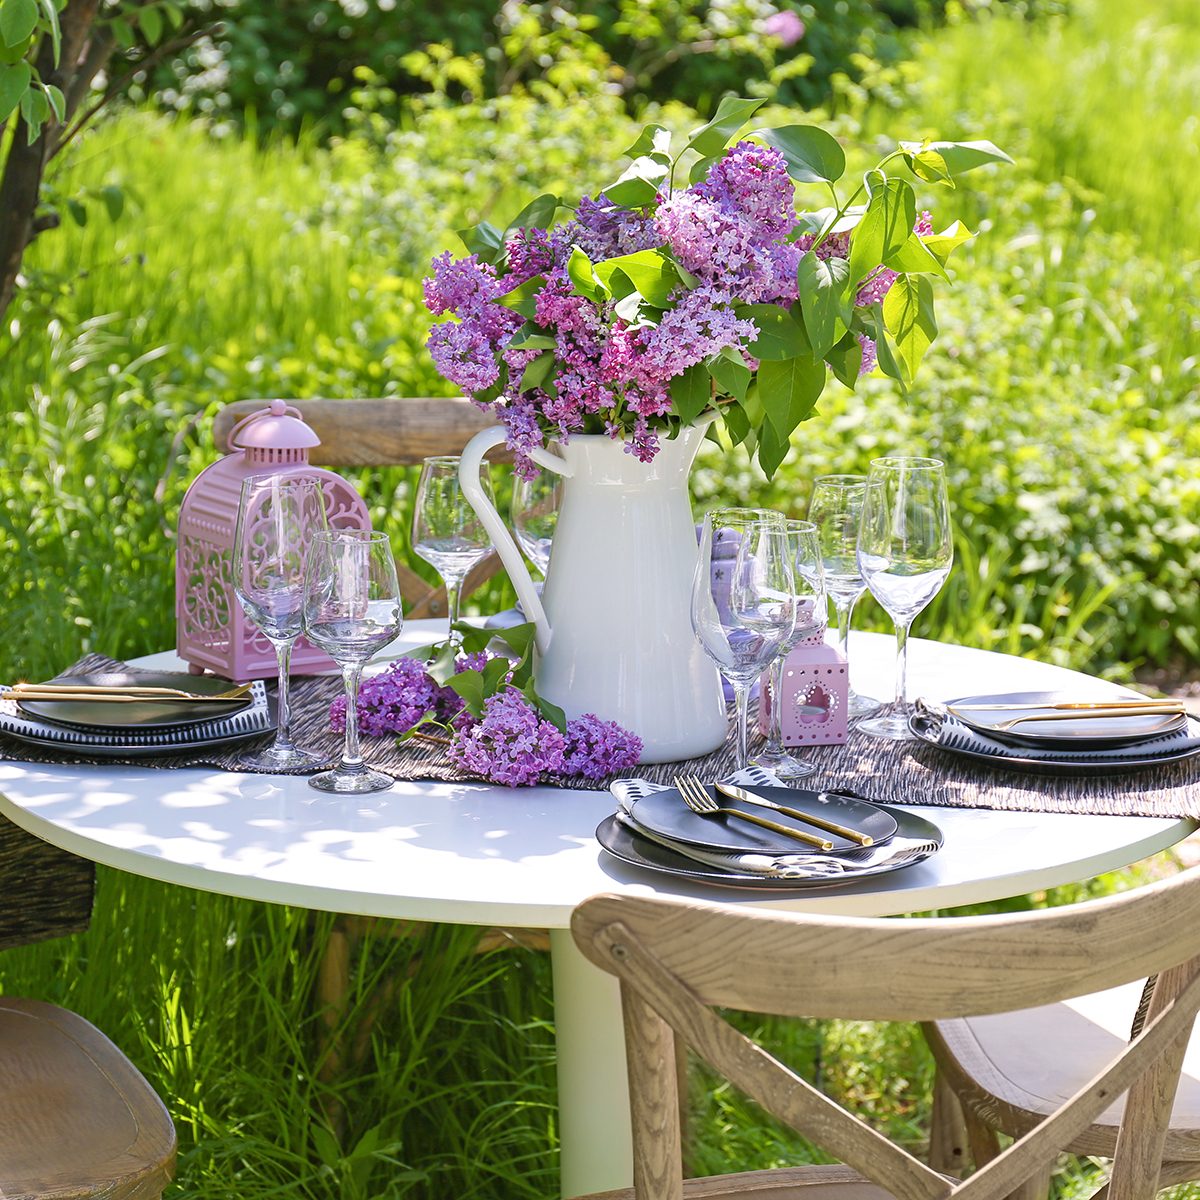 How to Host a Garden Party to Rival Any Royal Affair | Taste of Home